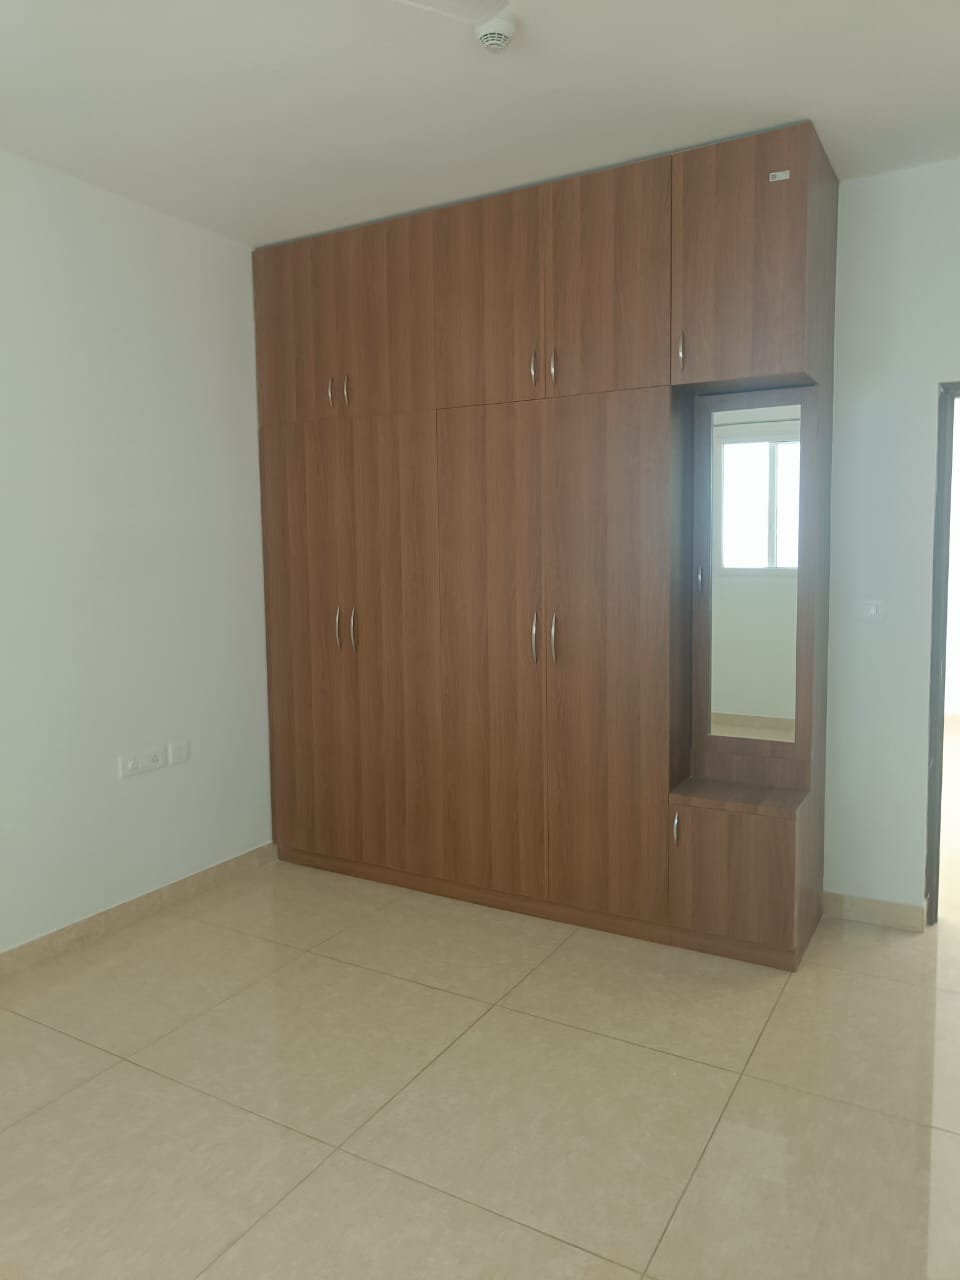 3 BHK Residential Apartment for Lease Only at JAML2 - 4502 in BTM Layout